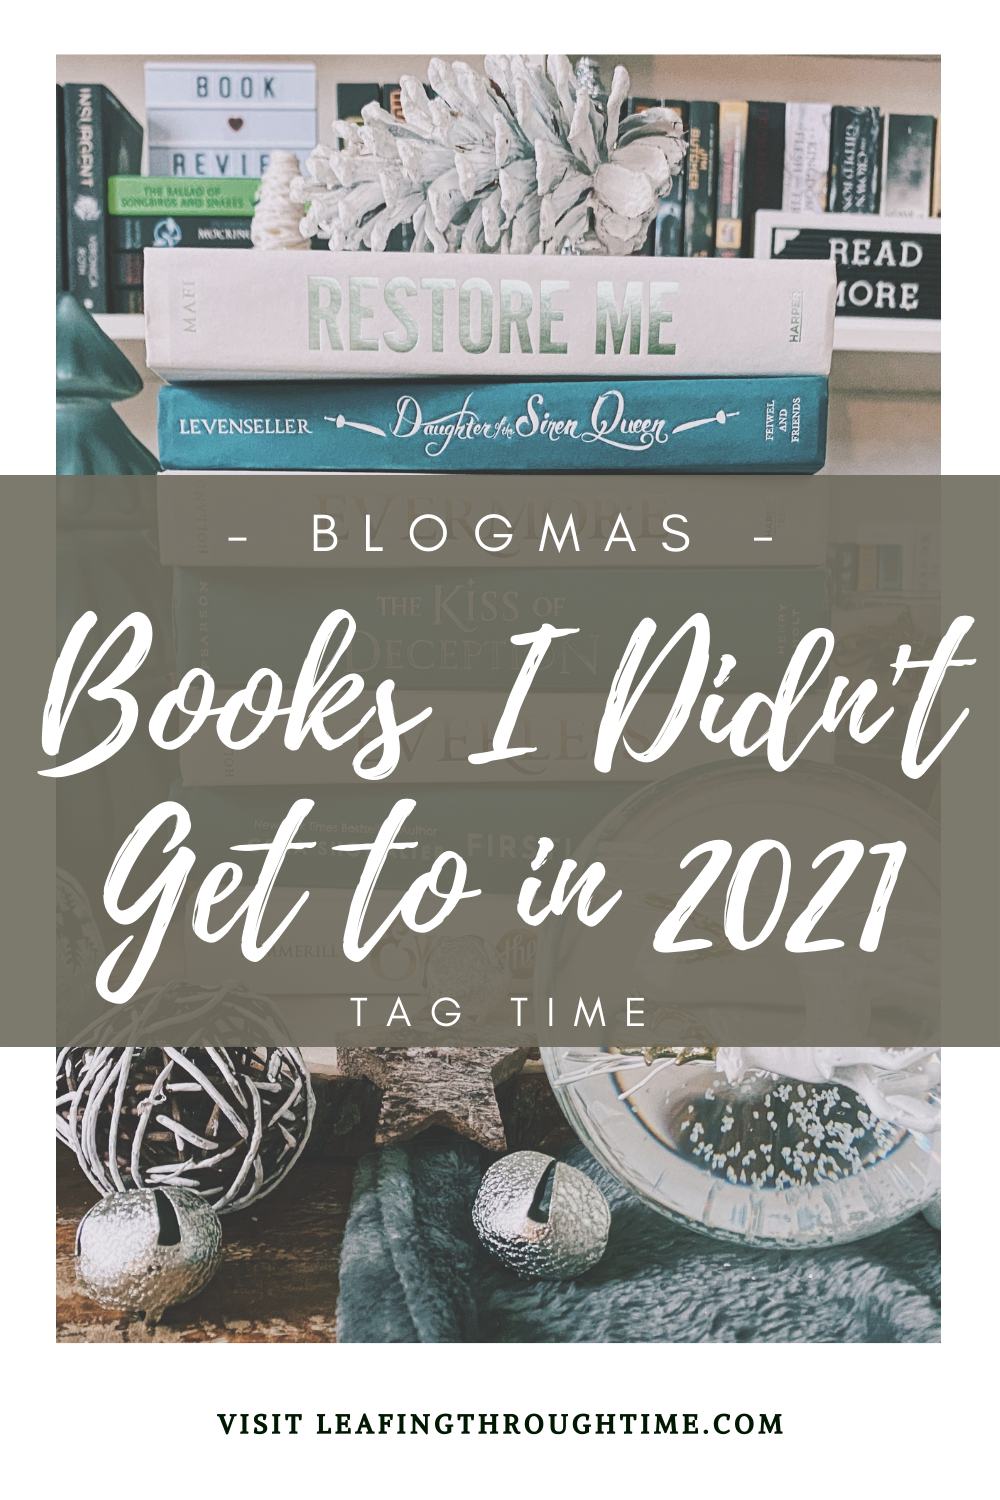 The Books I Didn’t Get to in 2021